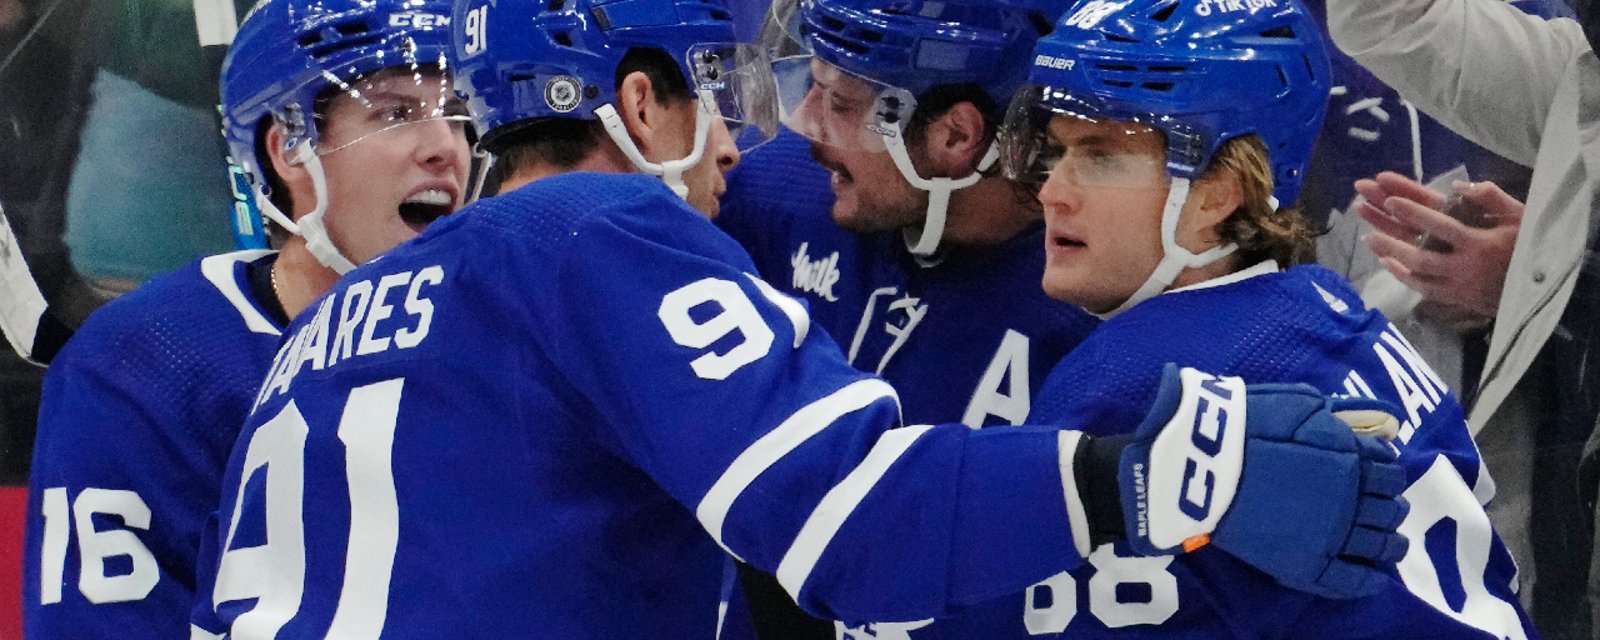 3 significant absentees at Leafs’ practice cause peculiar lineup changes